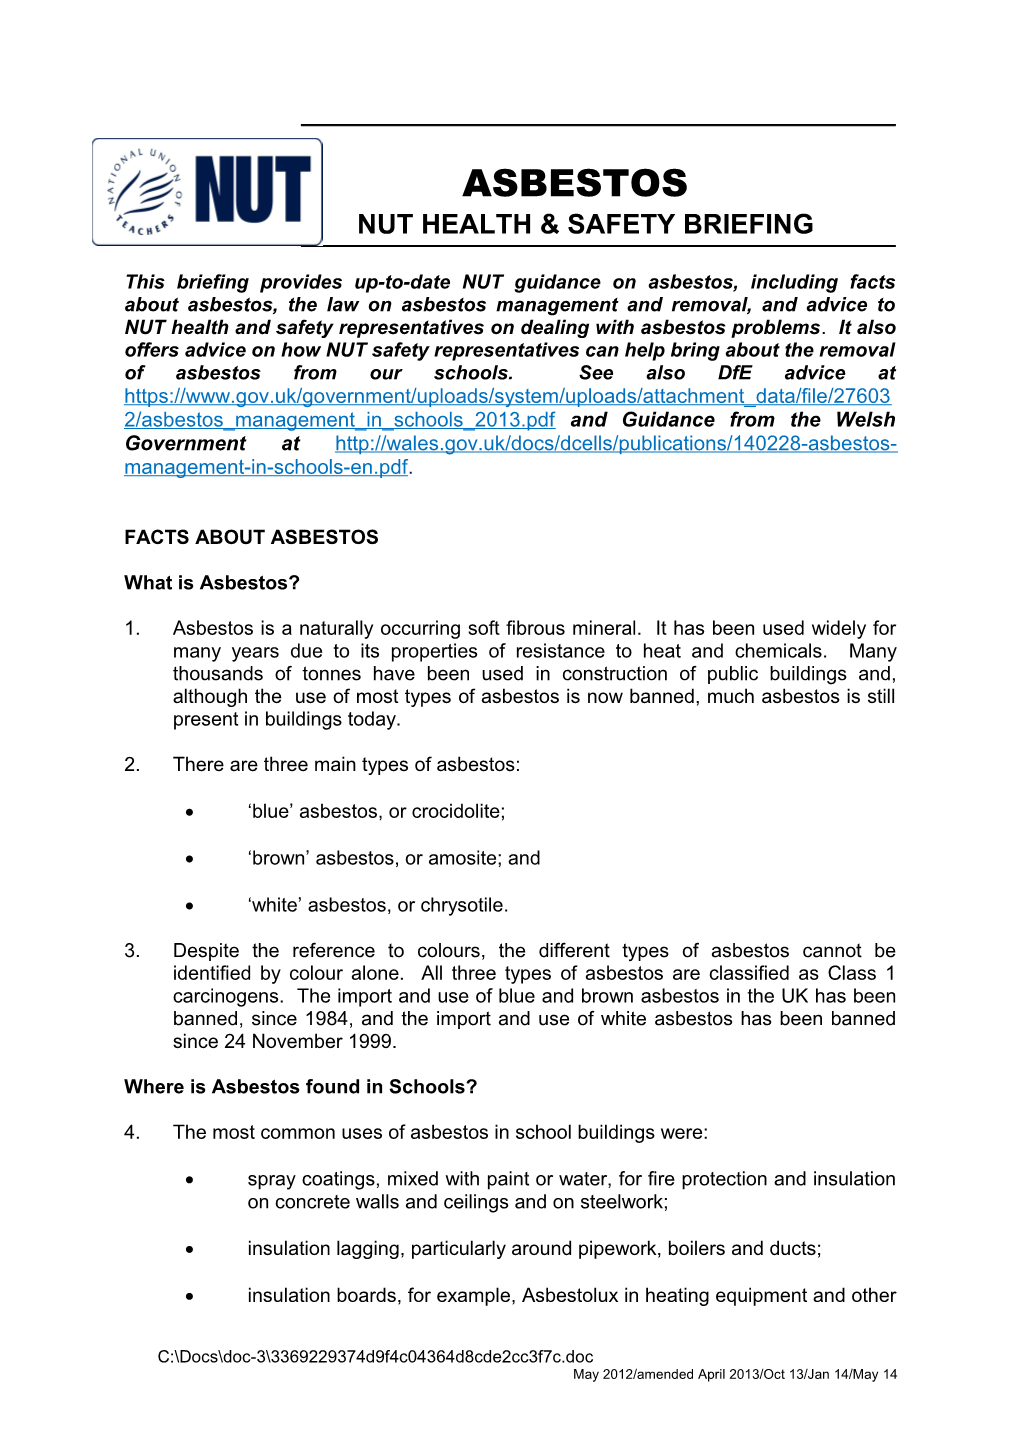 This Briefing Provides Up-To-Date NUT Guidance on Asbestos, Including Facts About Asbestos